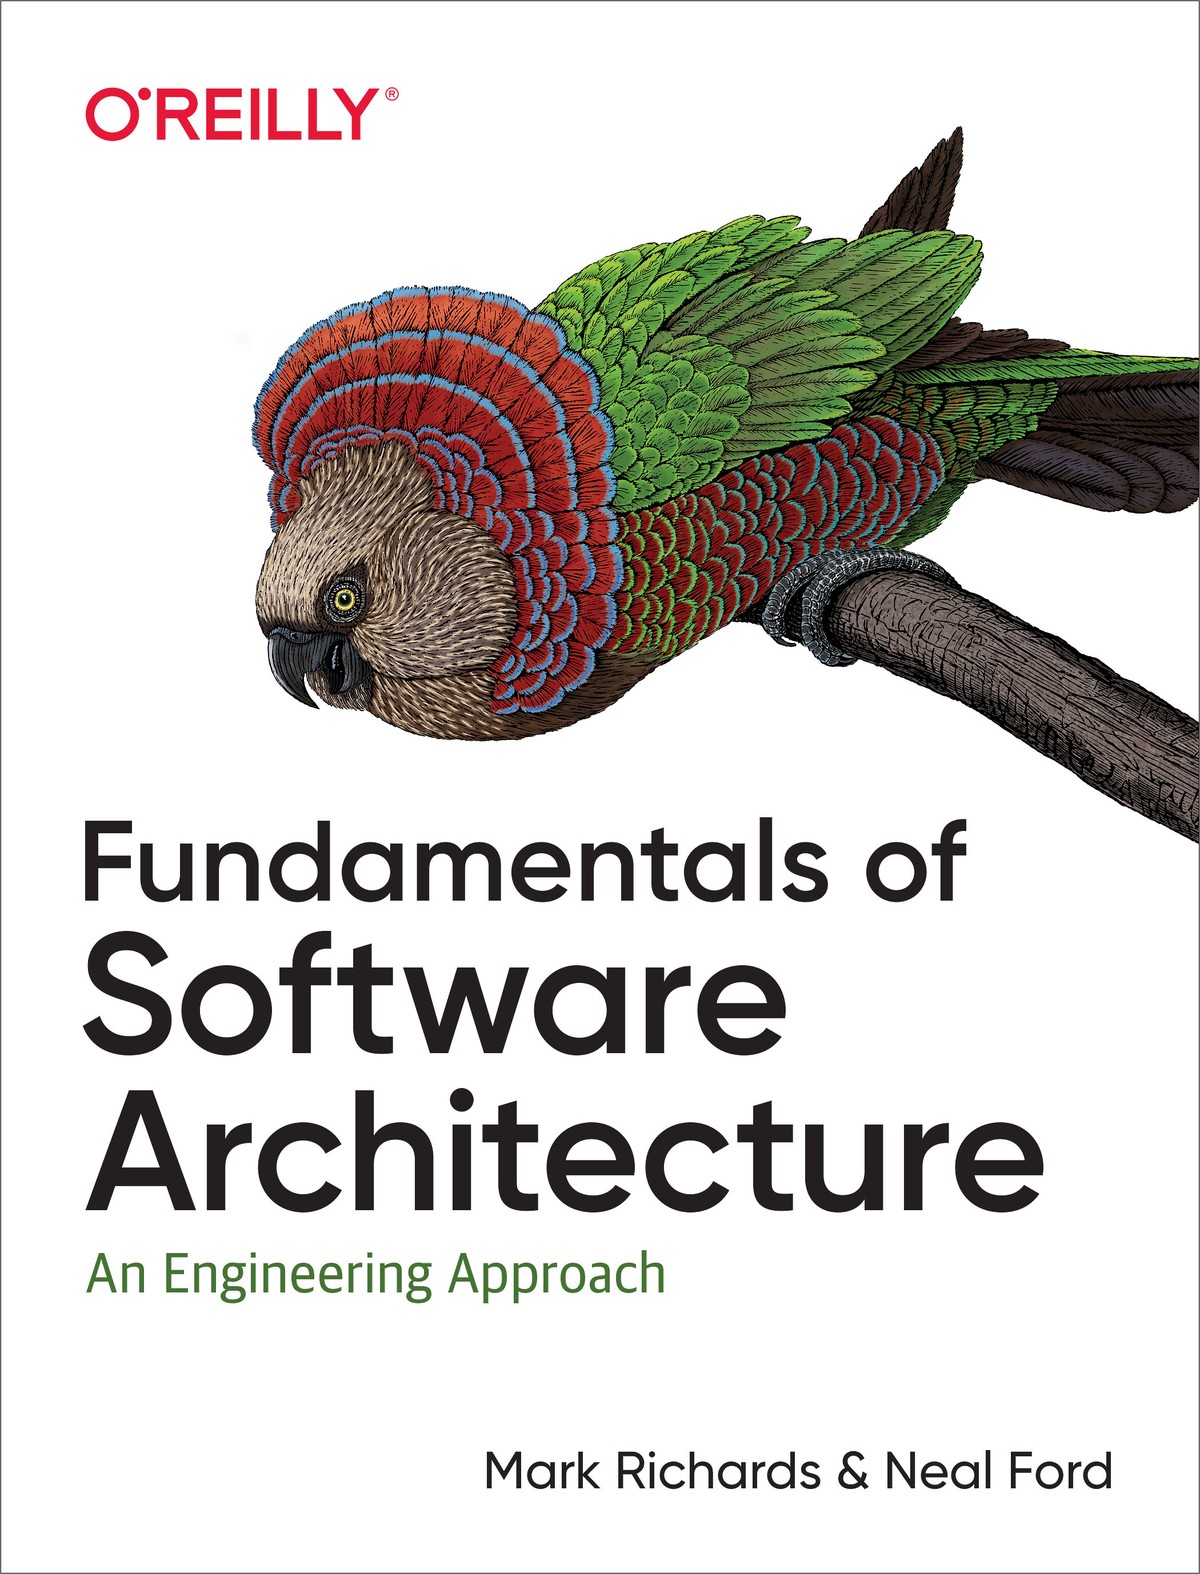 Mark Richards, Neal Ford: Fundamentals of Software Architecture (Paperback, 2020, O'Reilly Media)